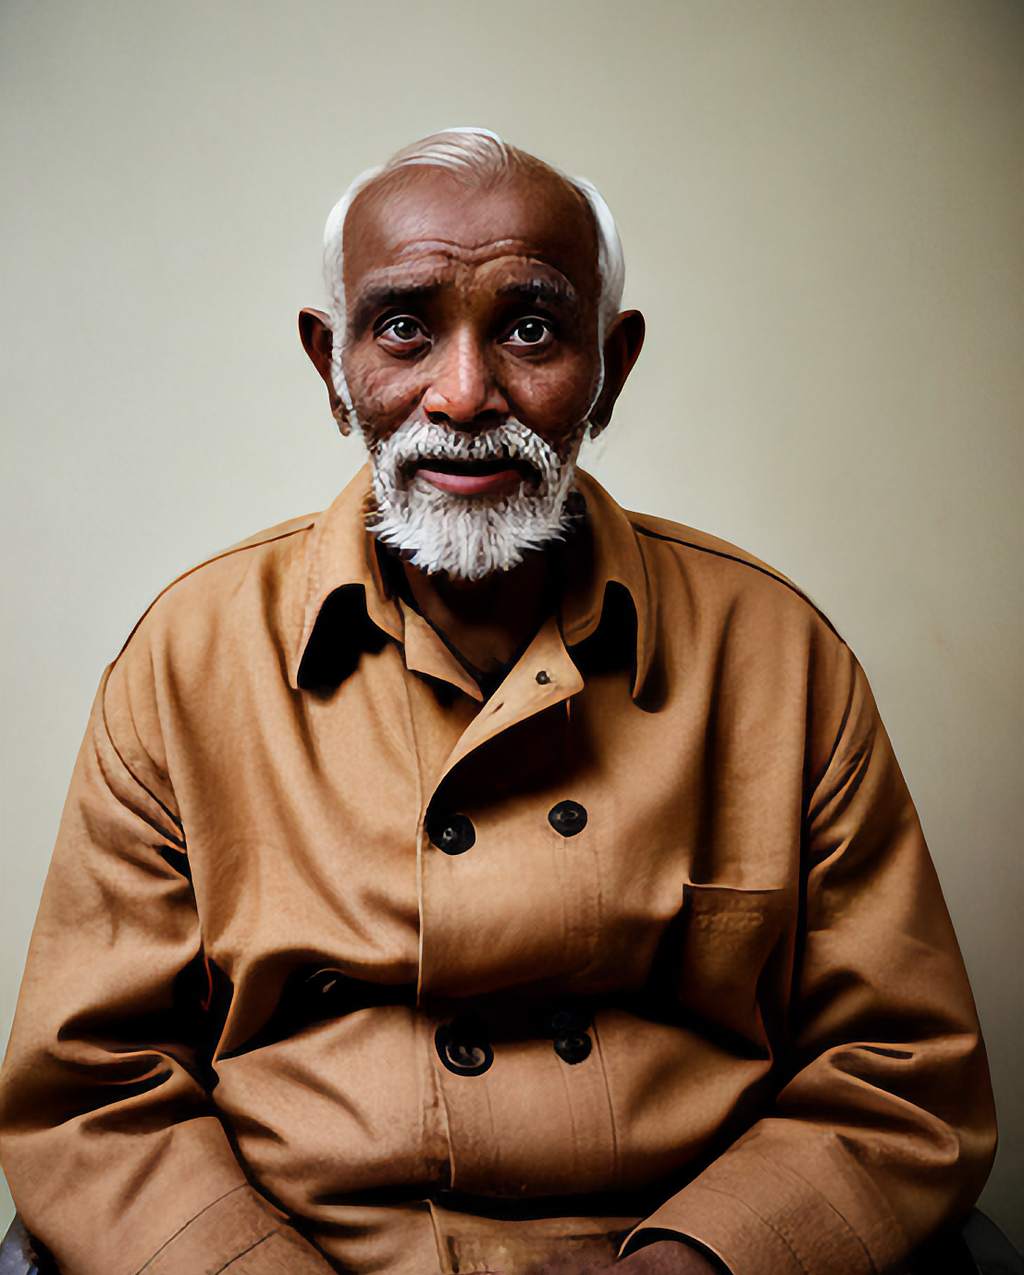 A realistic photograph-style image of an old Indian man, bearded and dark-skinned, looking at the viewer